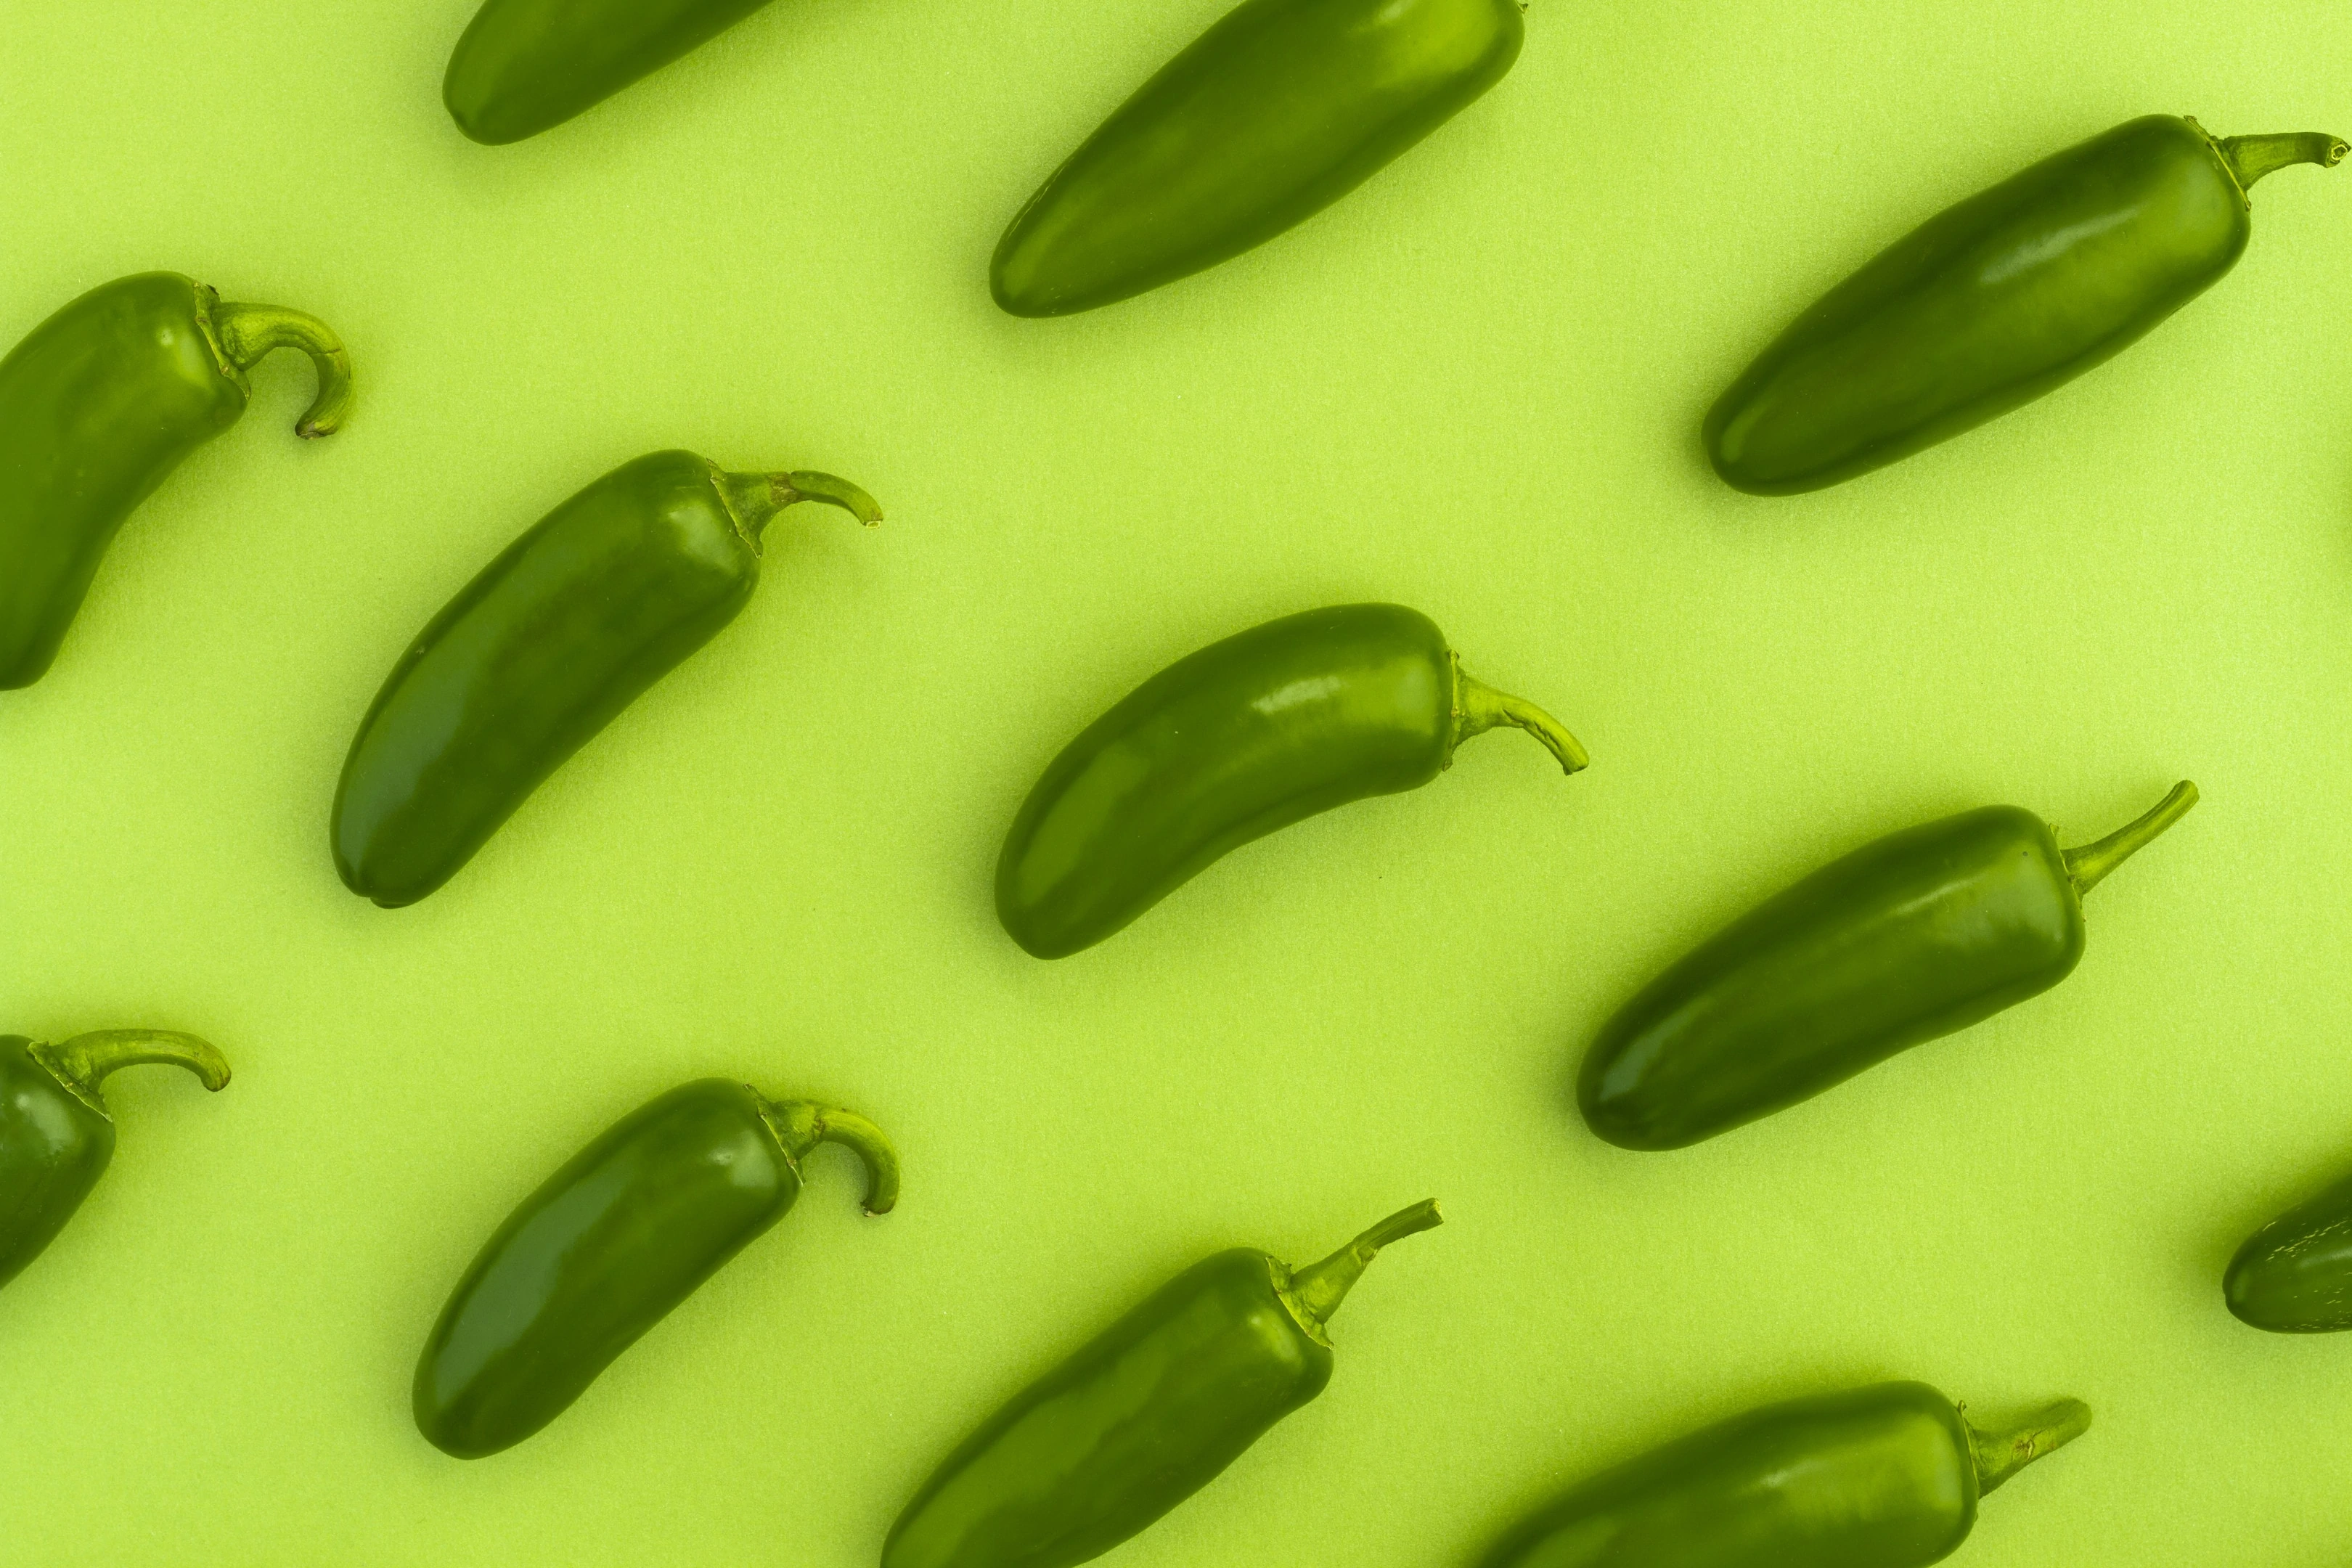 Jalapeno peppers on green background